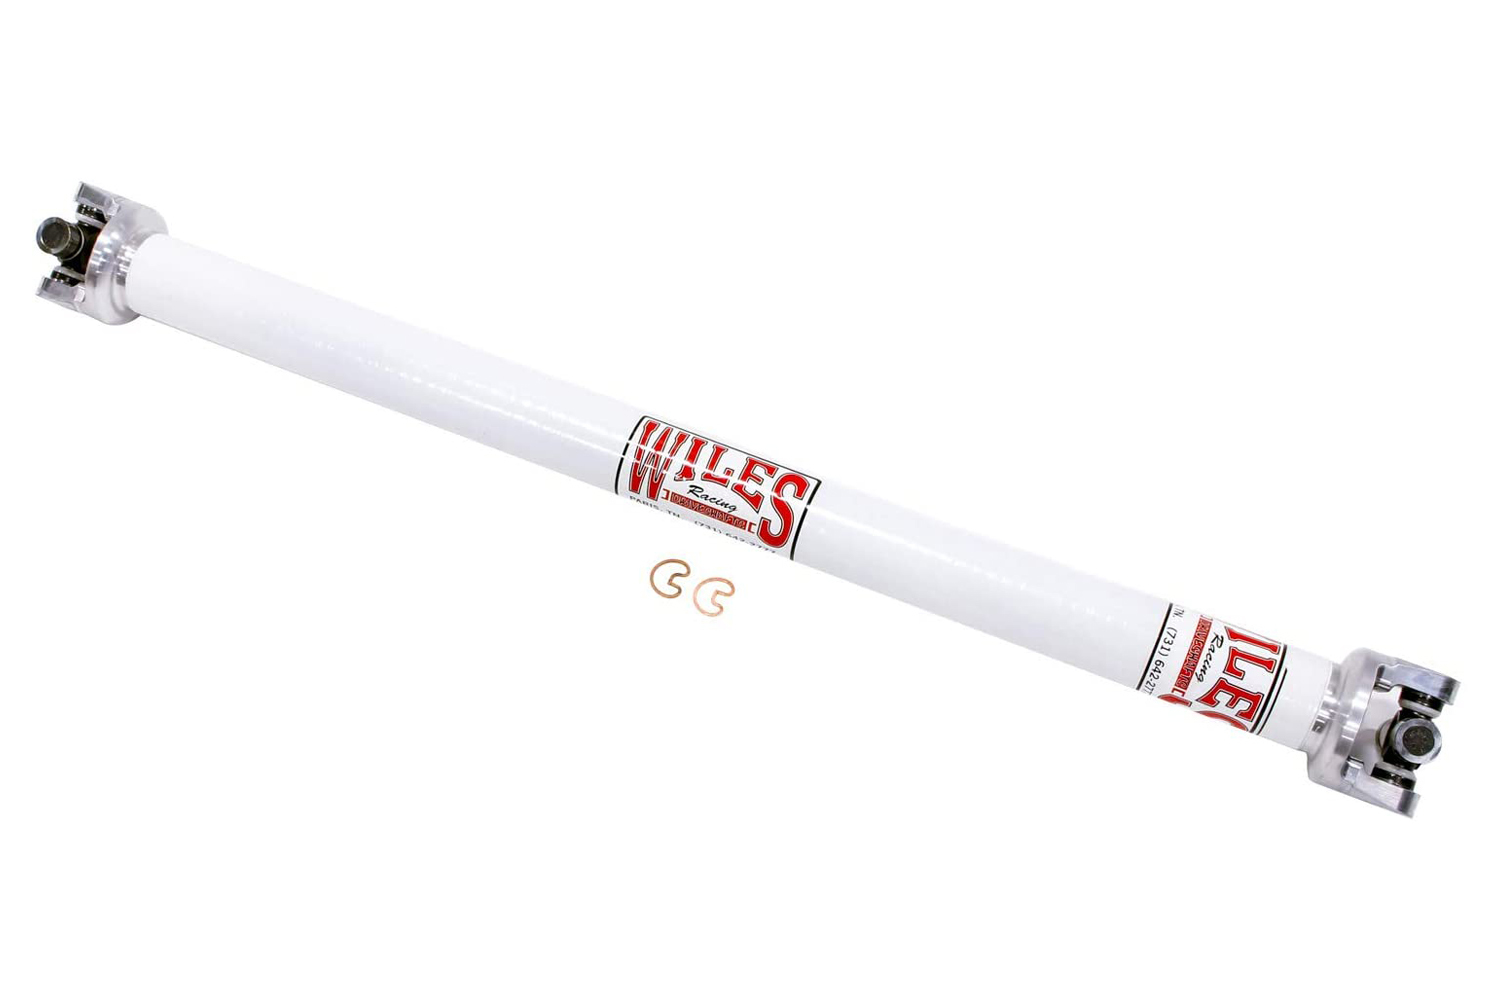 Wiles Driveshaft CF225380 Drive Shaft, 38 in Long, 2.25 in OD, 1310 U-Joints, Carbon Fiber, White Paint, Universal, Each